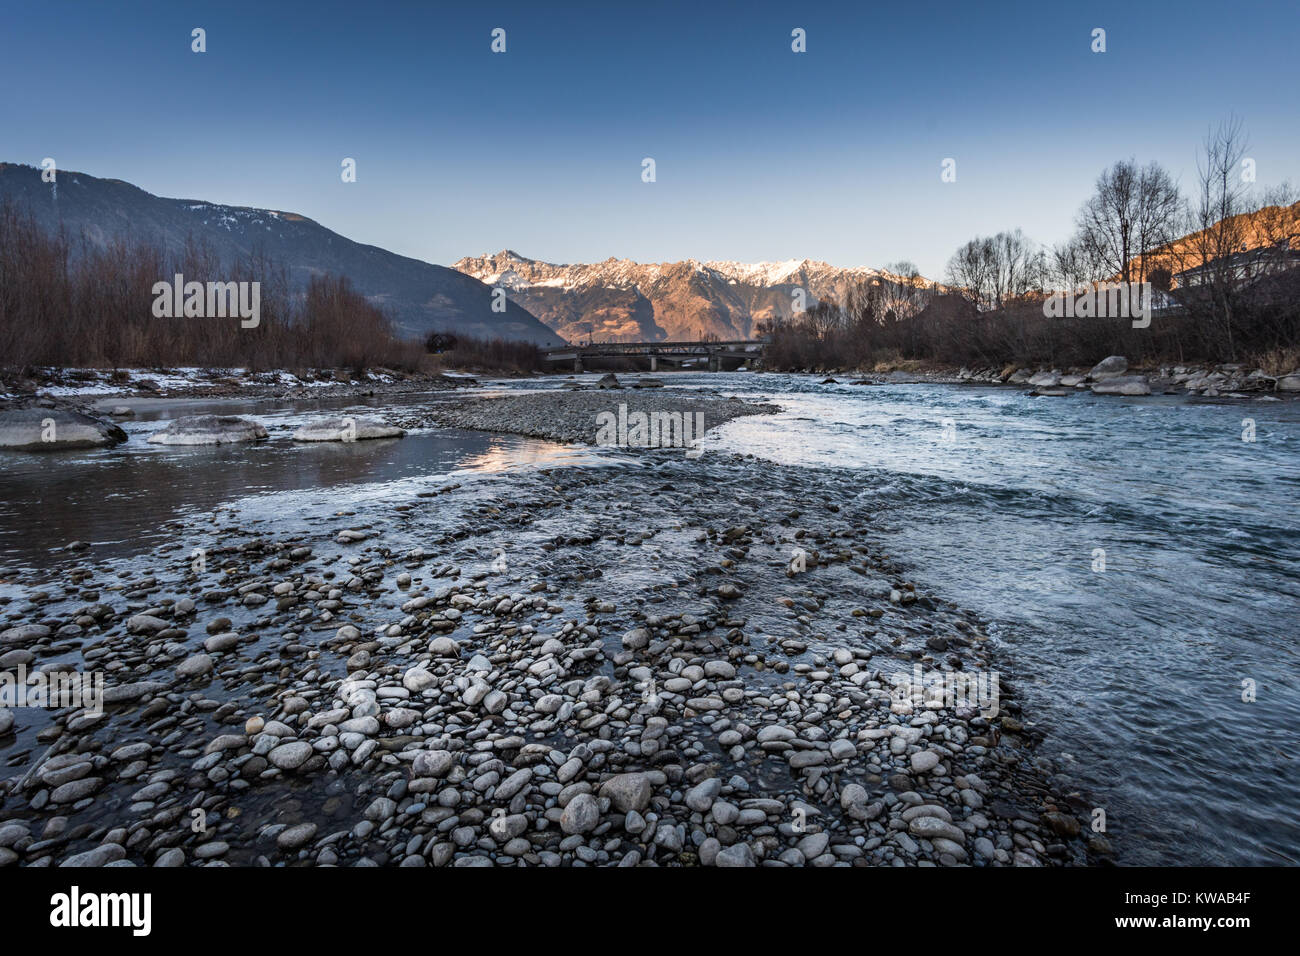 Adige River in South Tyrol, Italy Stock Photo